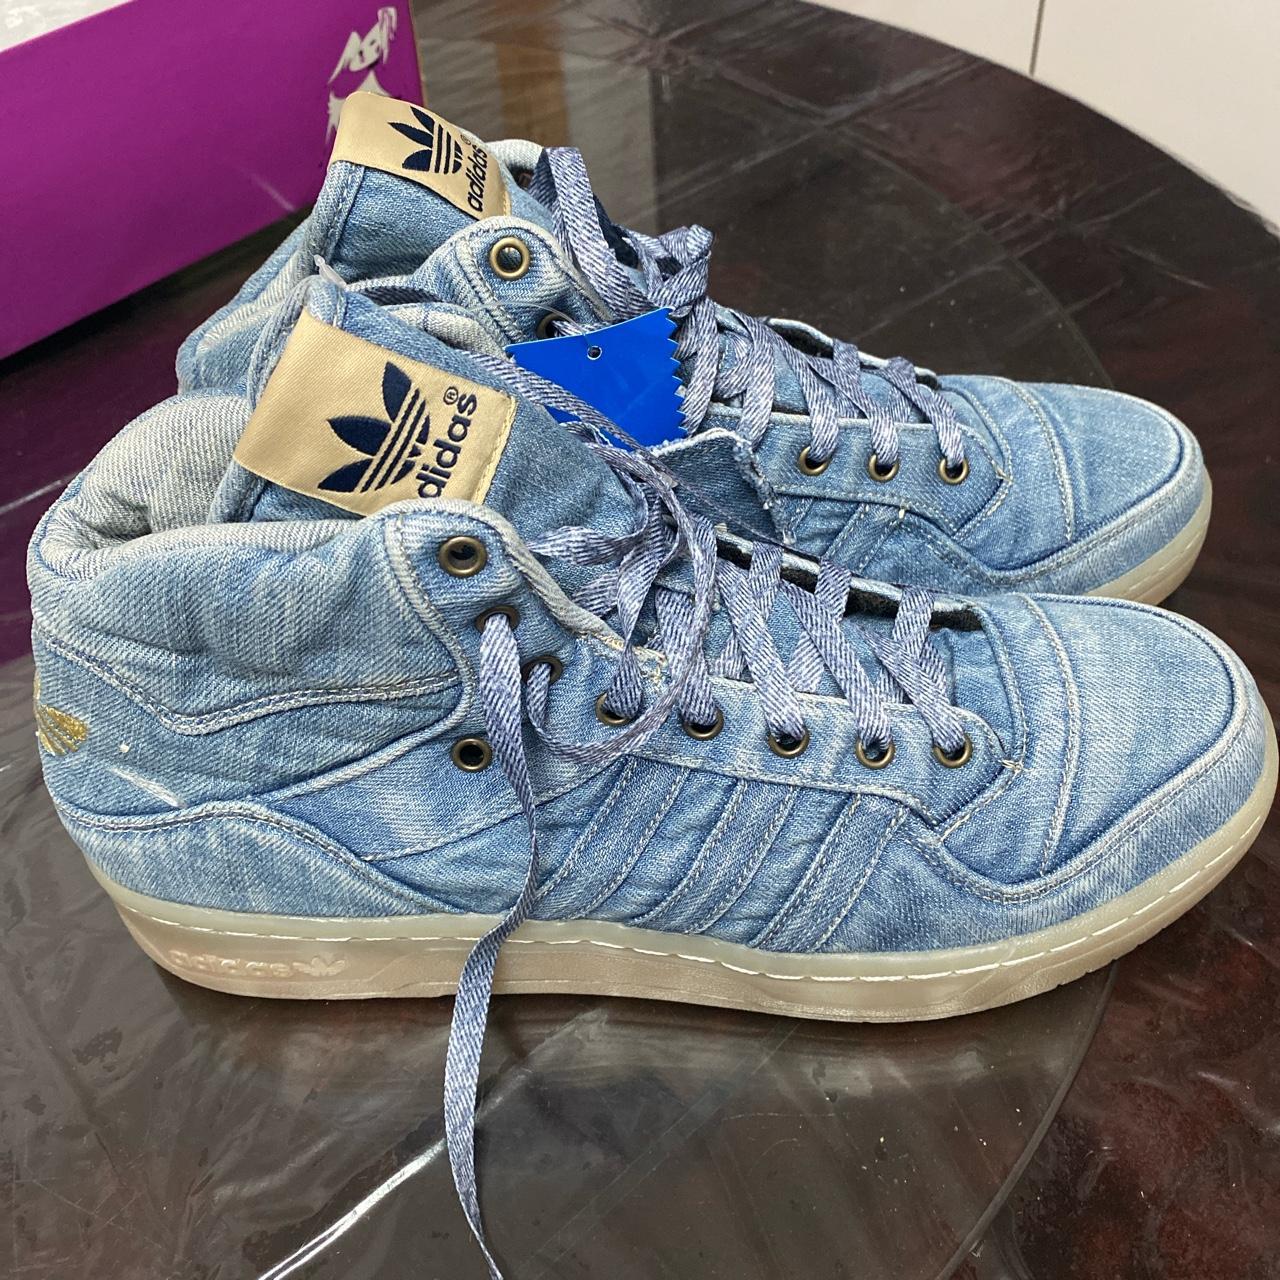 Jeremy Scott Men's Blue and Gold Trainers